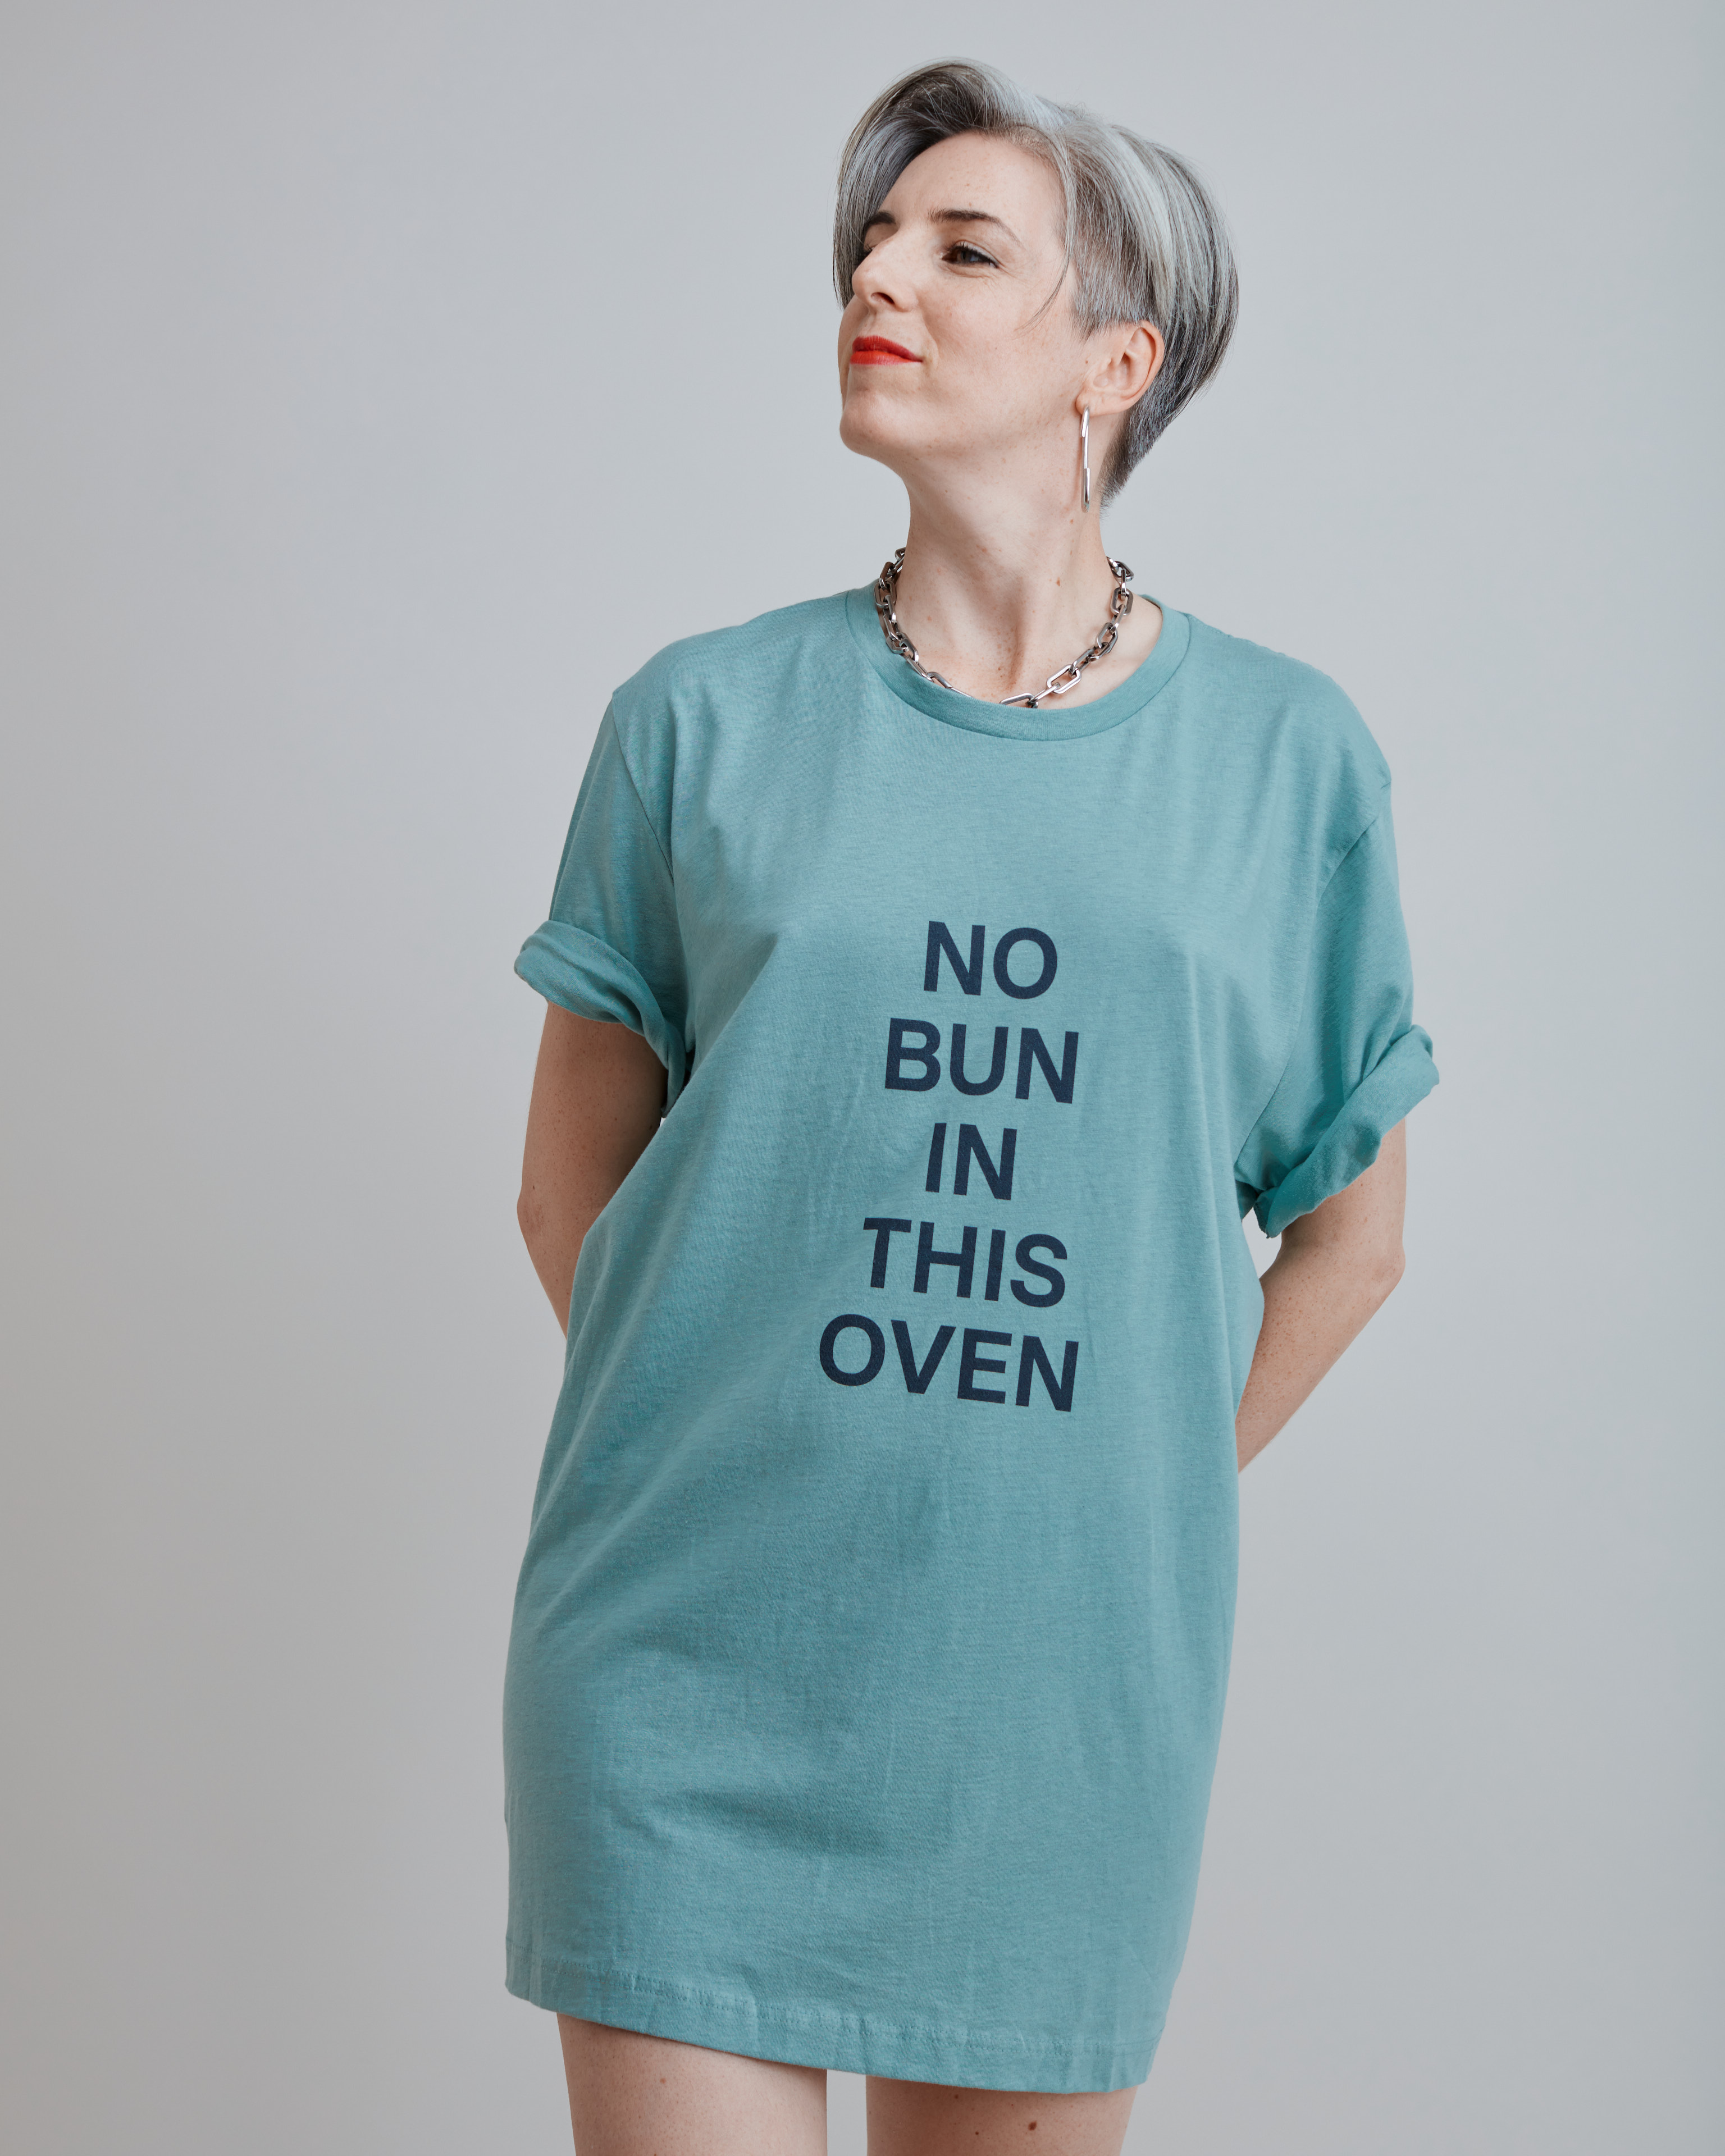 Heather blue No Bun in this Oven t-shirt 2XL